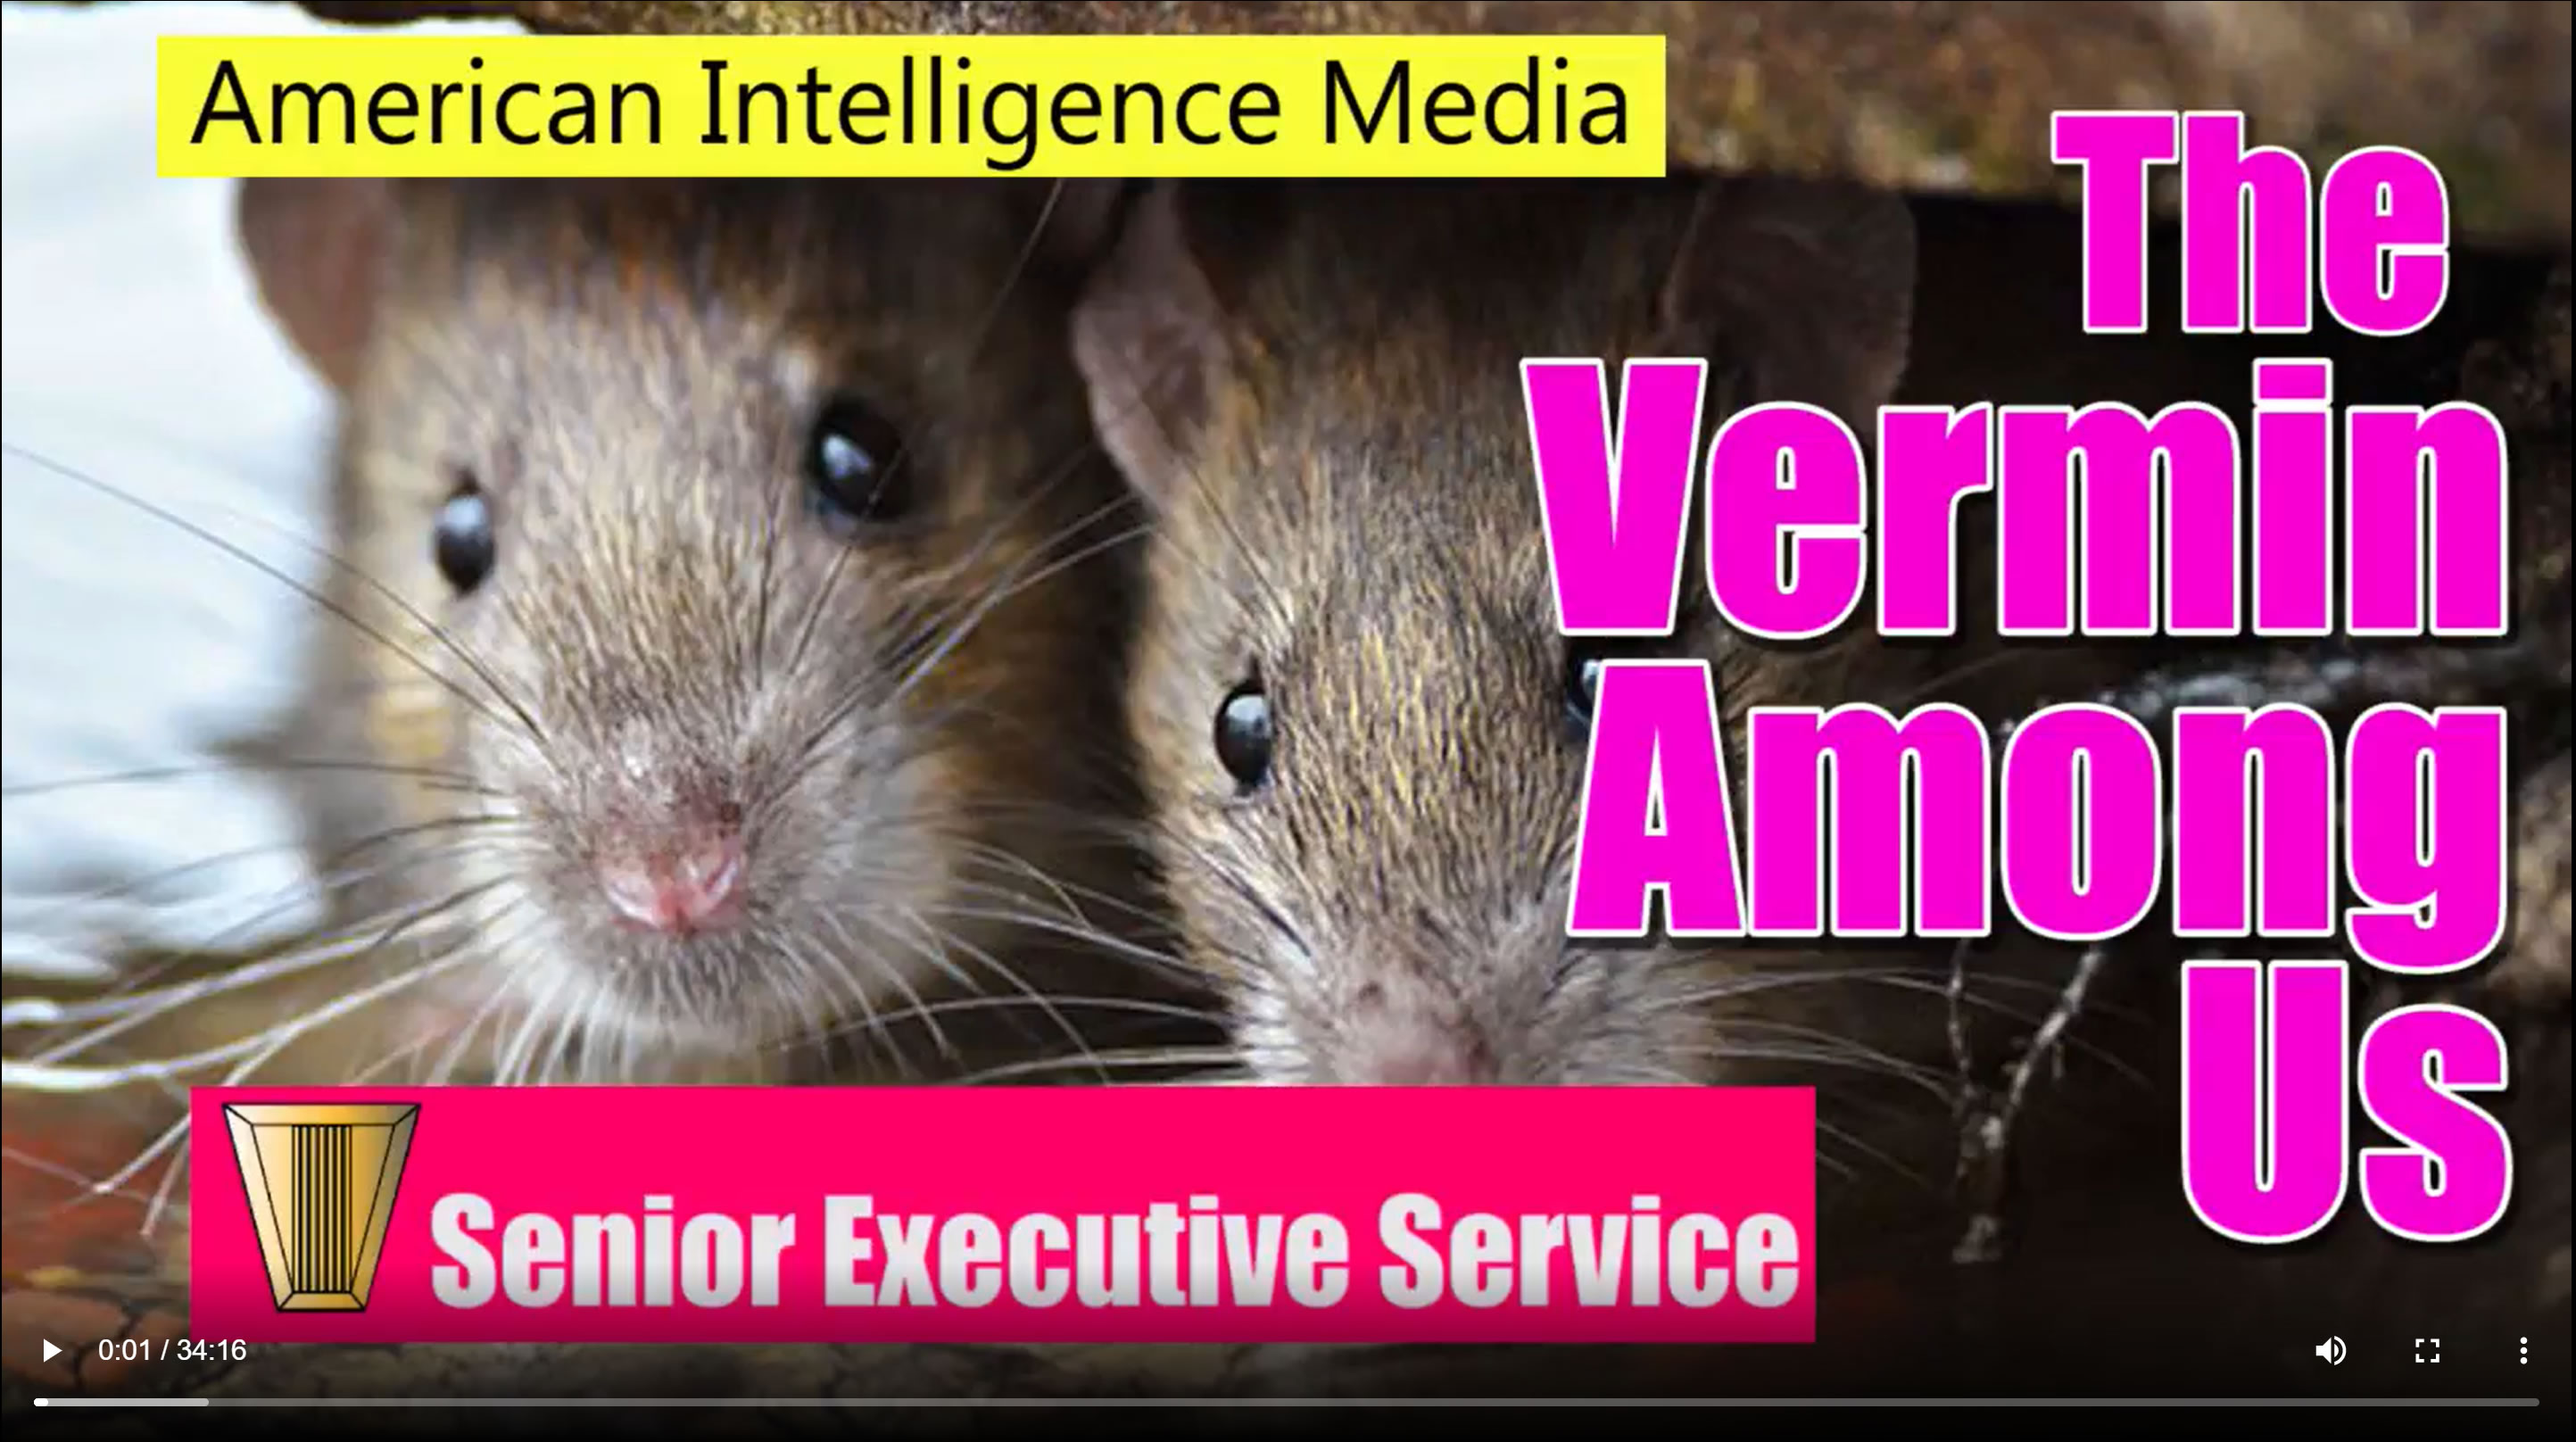 Thomas Paine, Michael McKibben. (Apr. 05, 2018). SES Vermin Among Us. American Intelligence Media, Americans for Innovation.